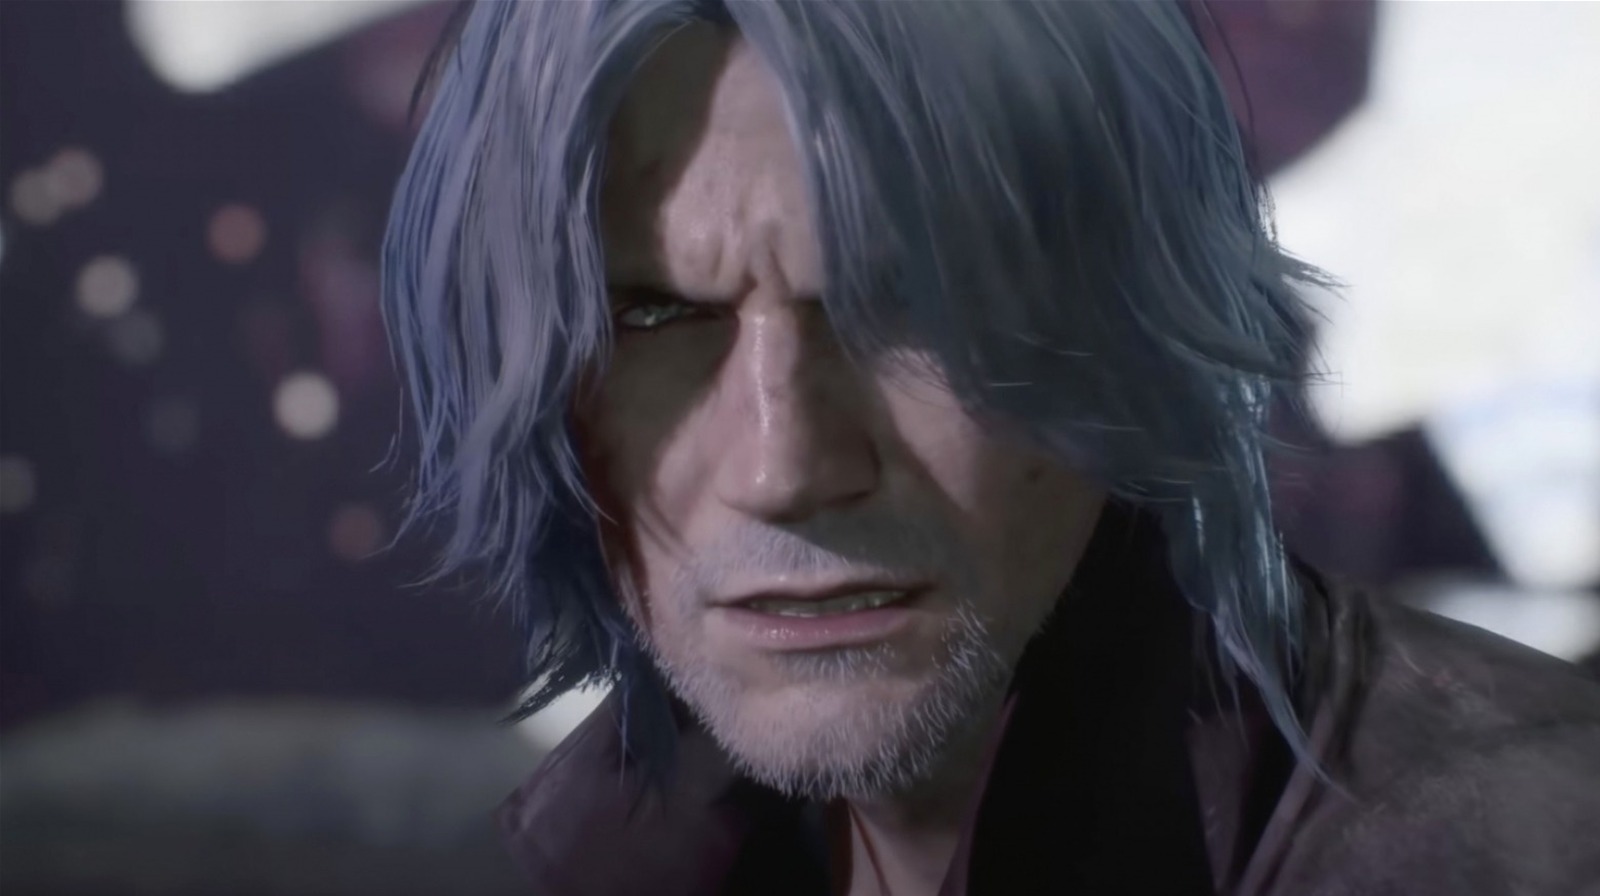 Devil May Cry 5 Análise - Gamereactor